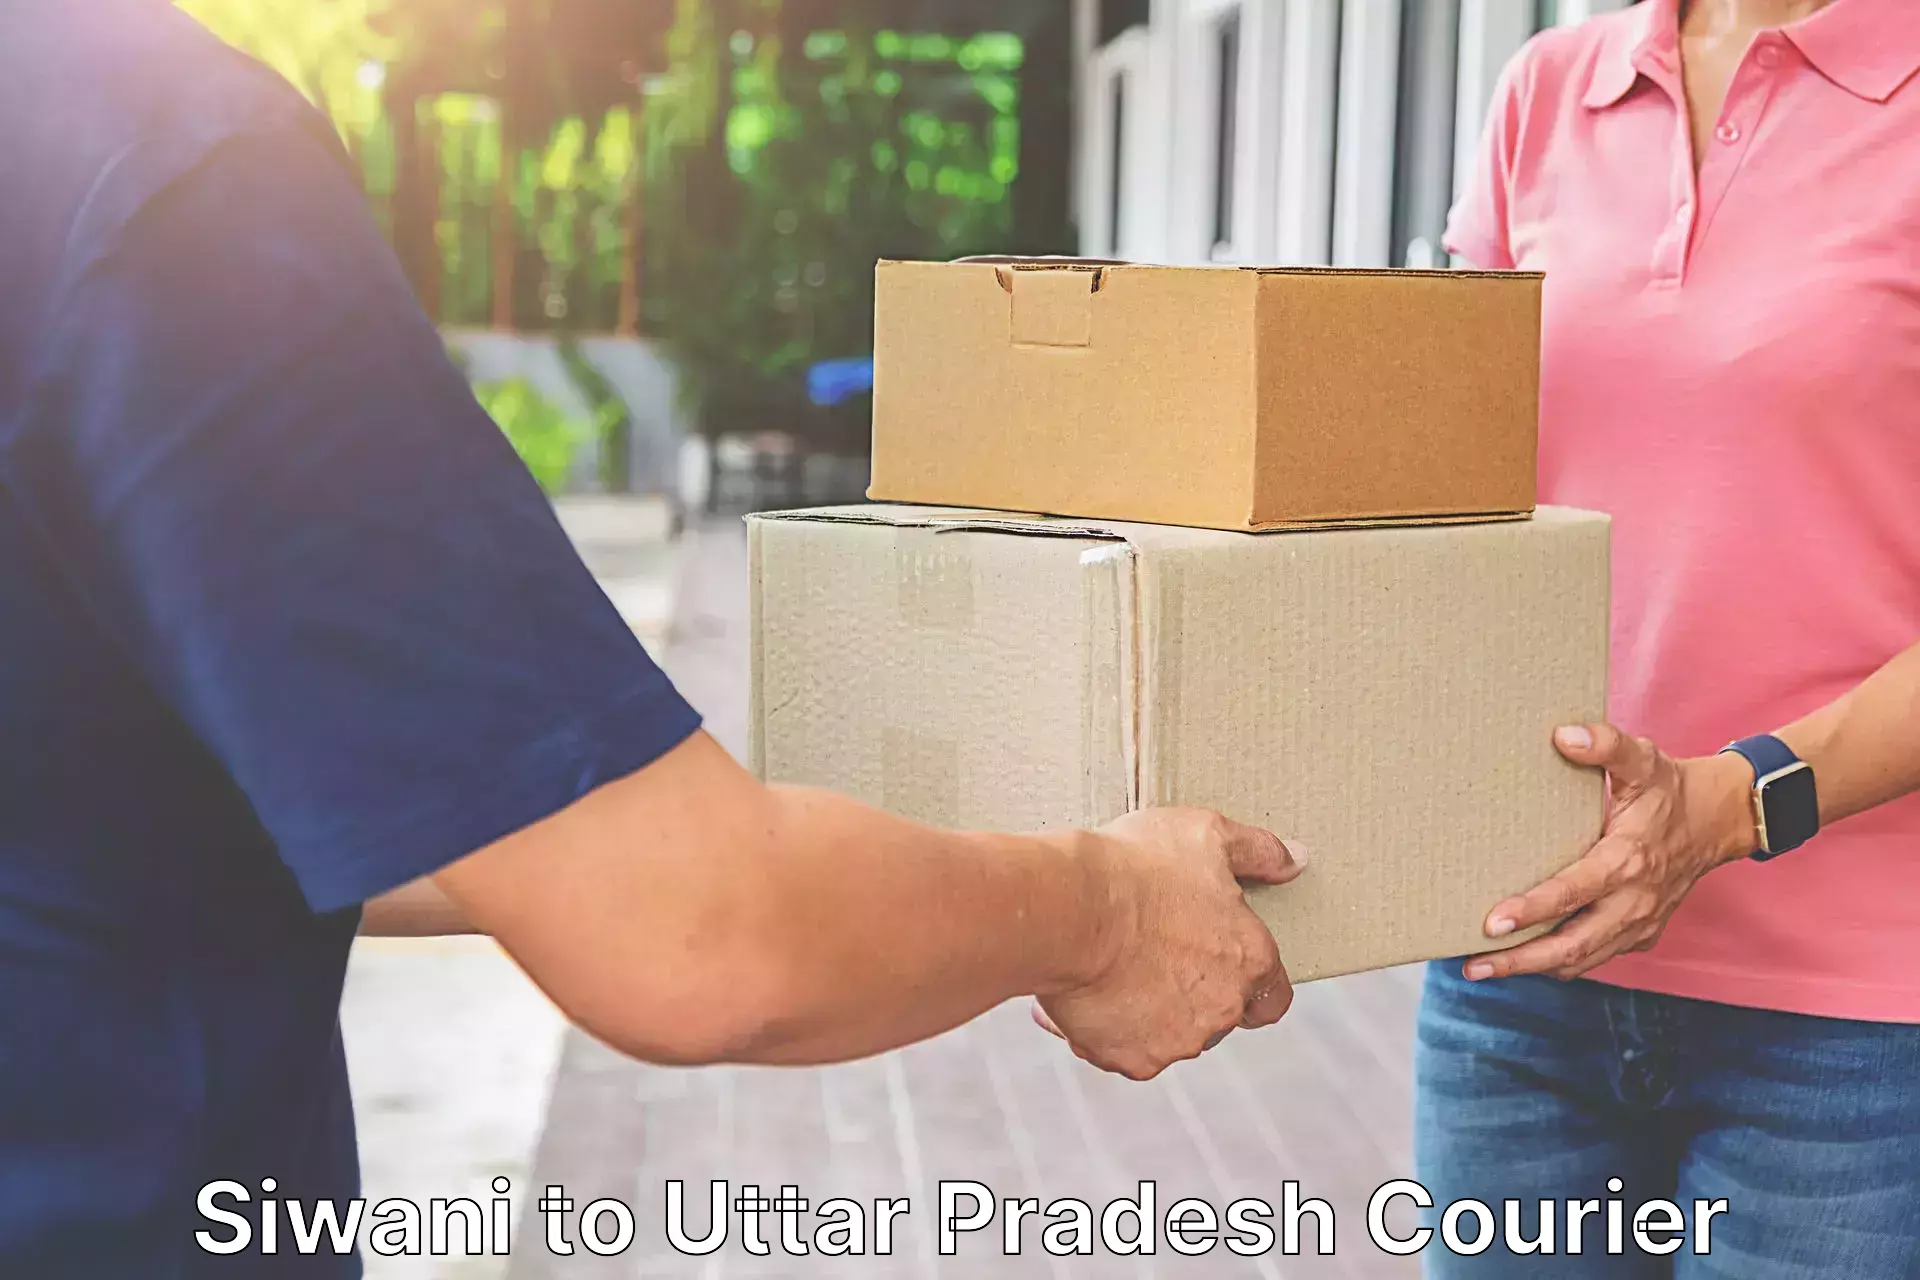 Reliable courier service Siwani to Khurja